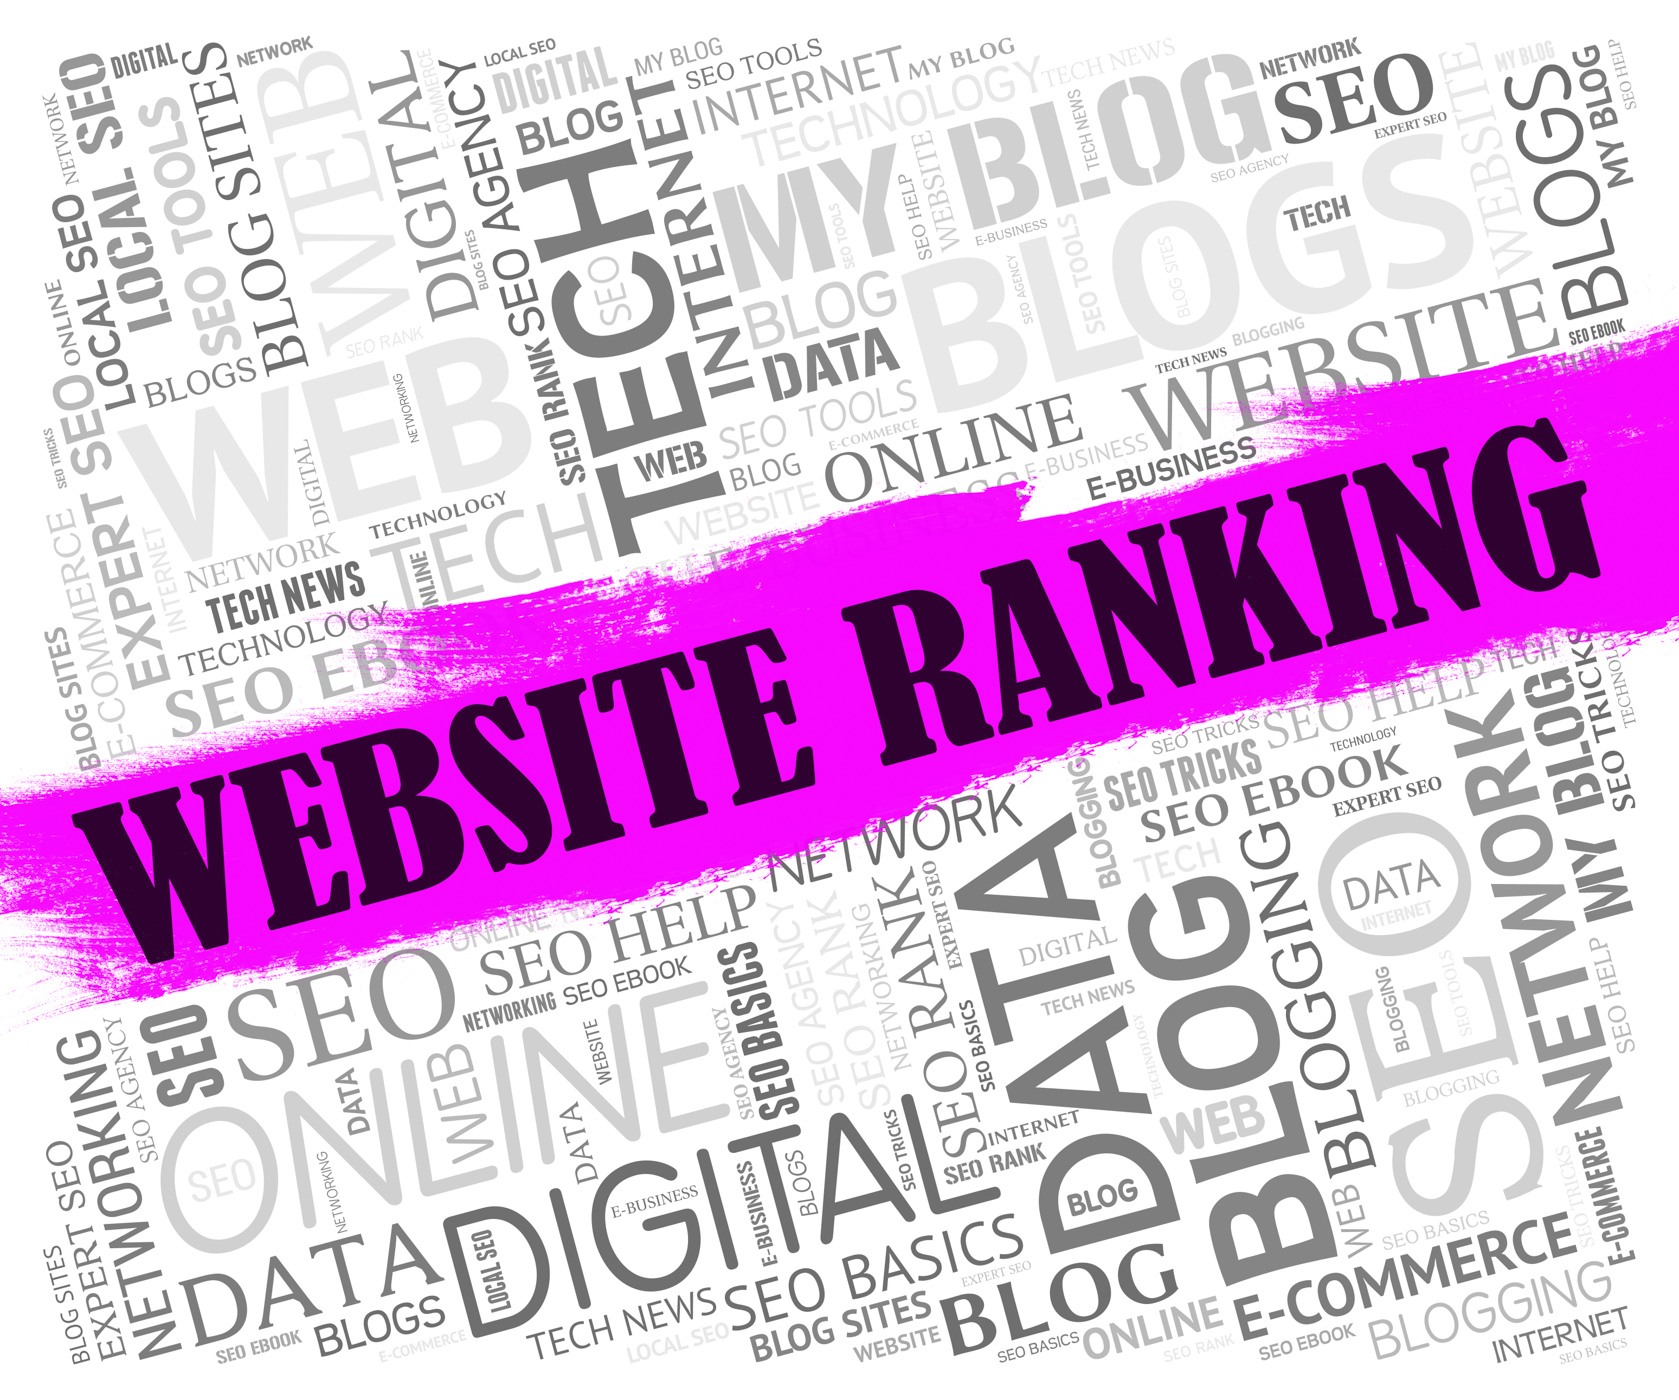 Website ranking means search engine and marketing photo